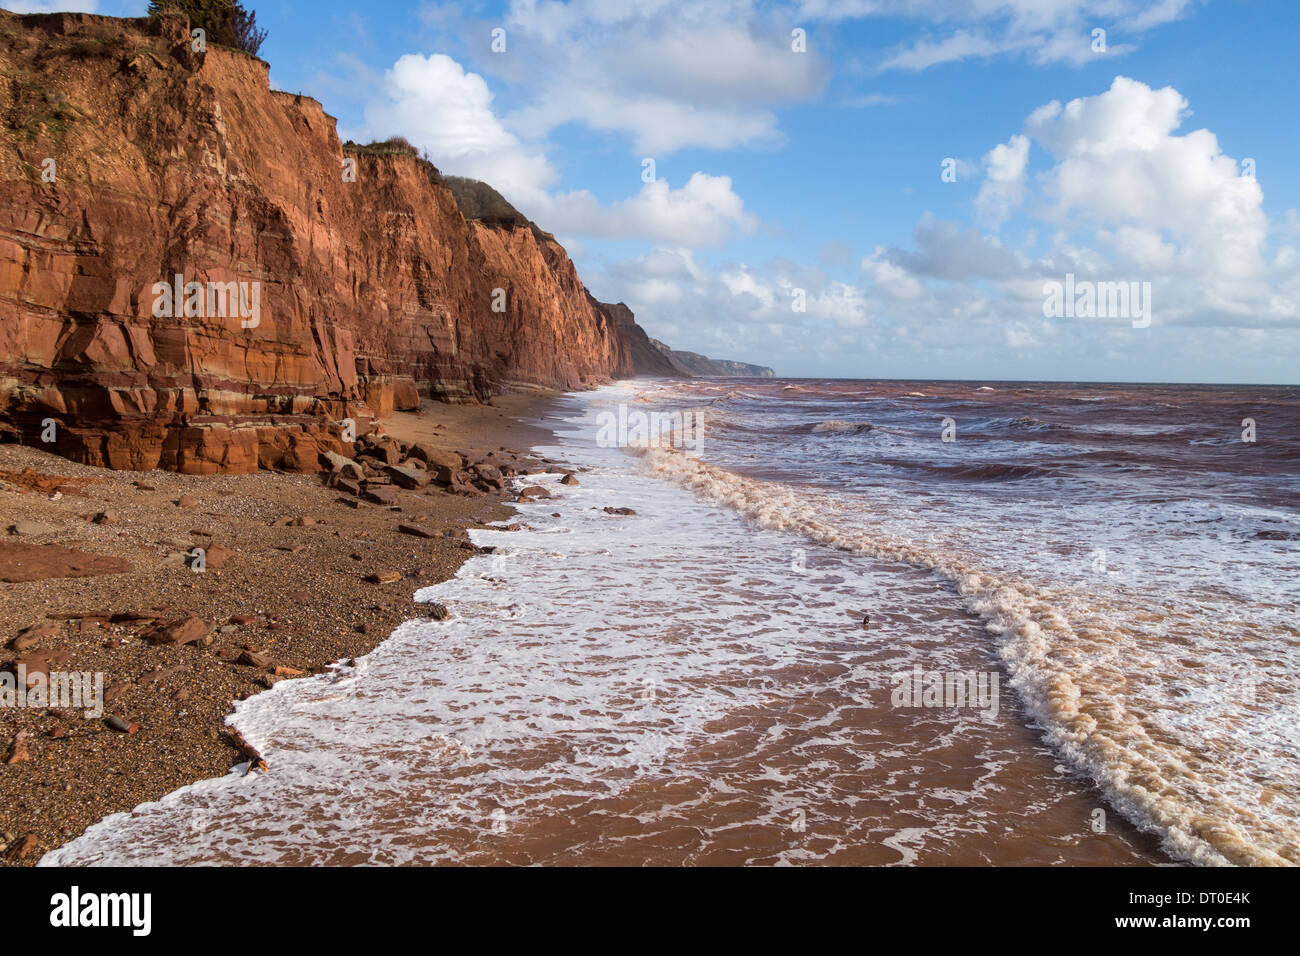 Sidmouth,Devon,England. February 2014. The Jurassic coastline from the eastern end of Sidmouth promenade. Stock Photo